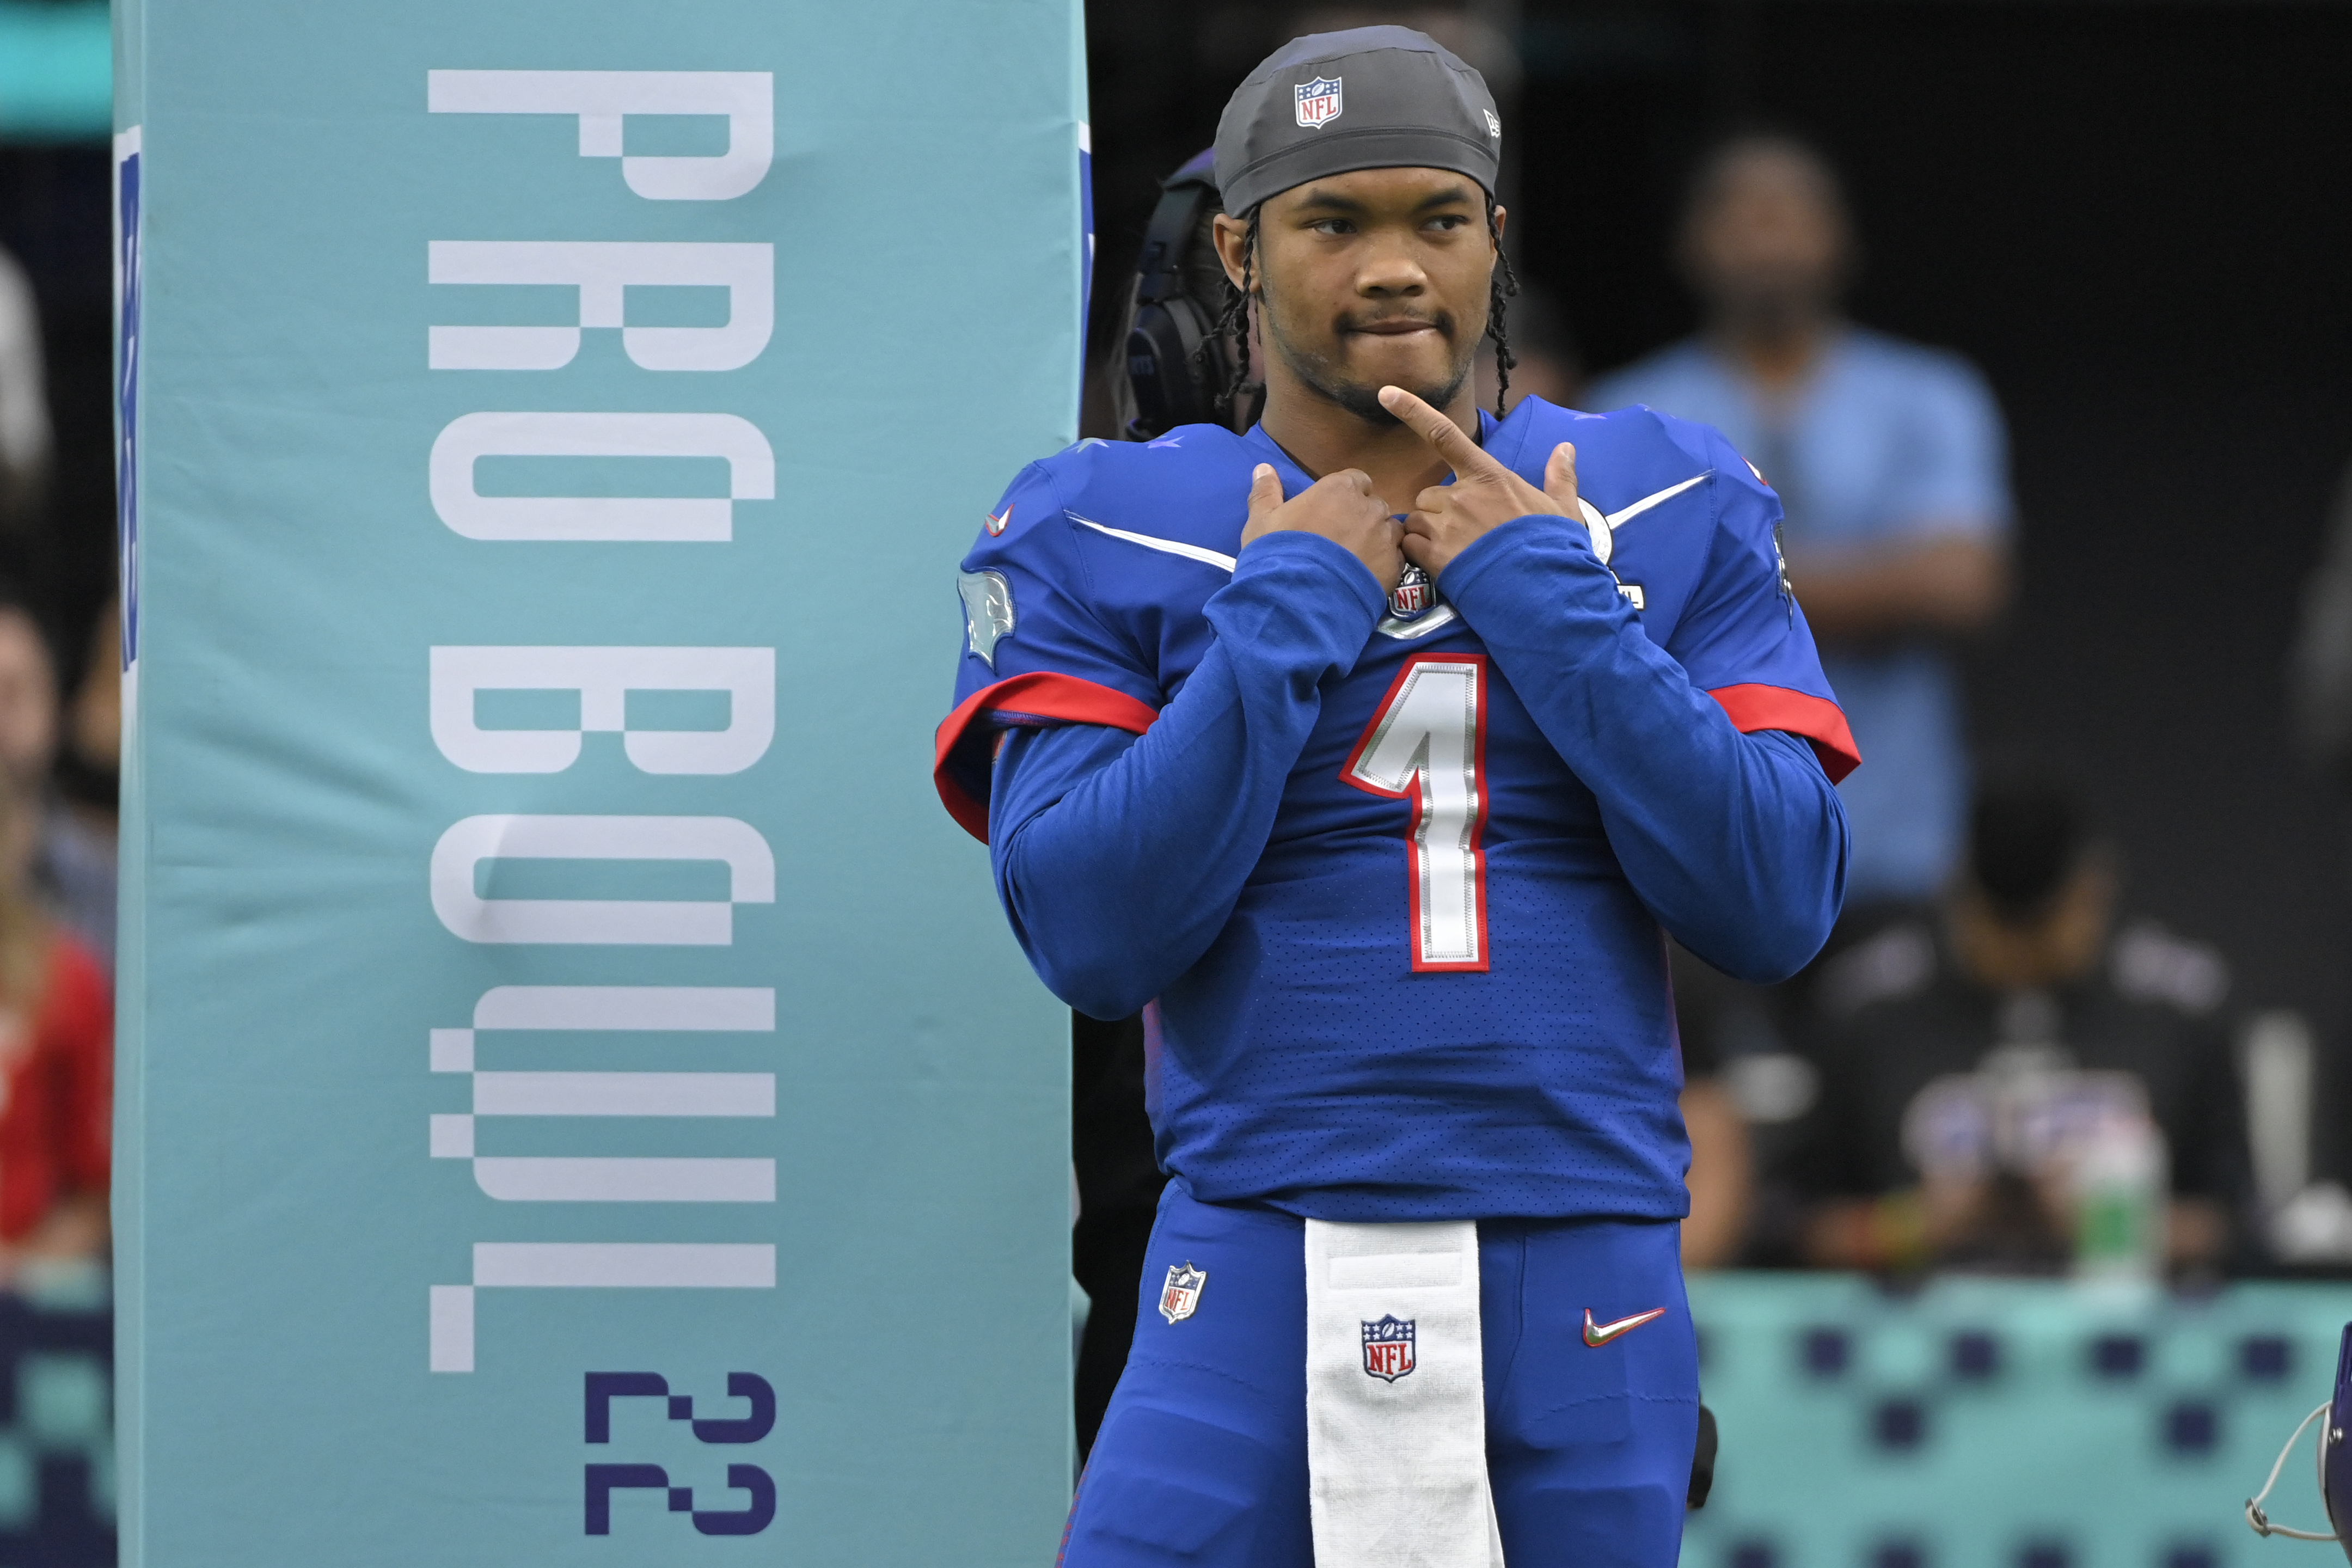 Kyler Murray Rumors - Cardinals Still Have Not Made a Contract Extension Offer to QB thumbnail